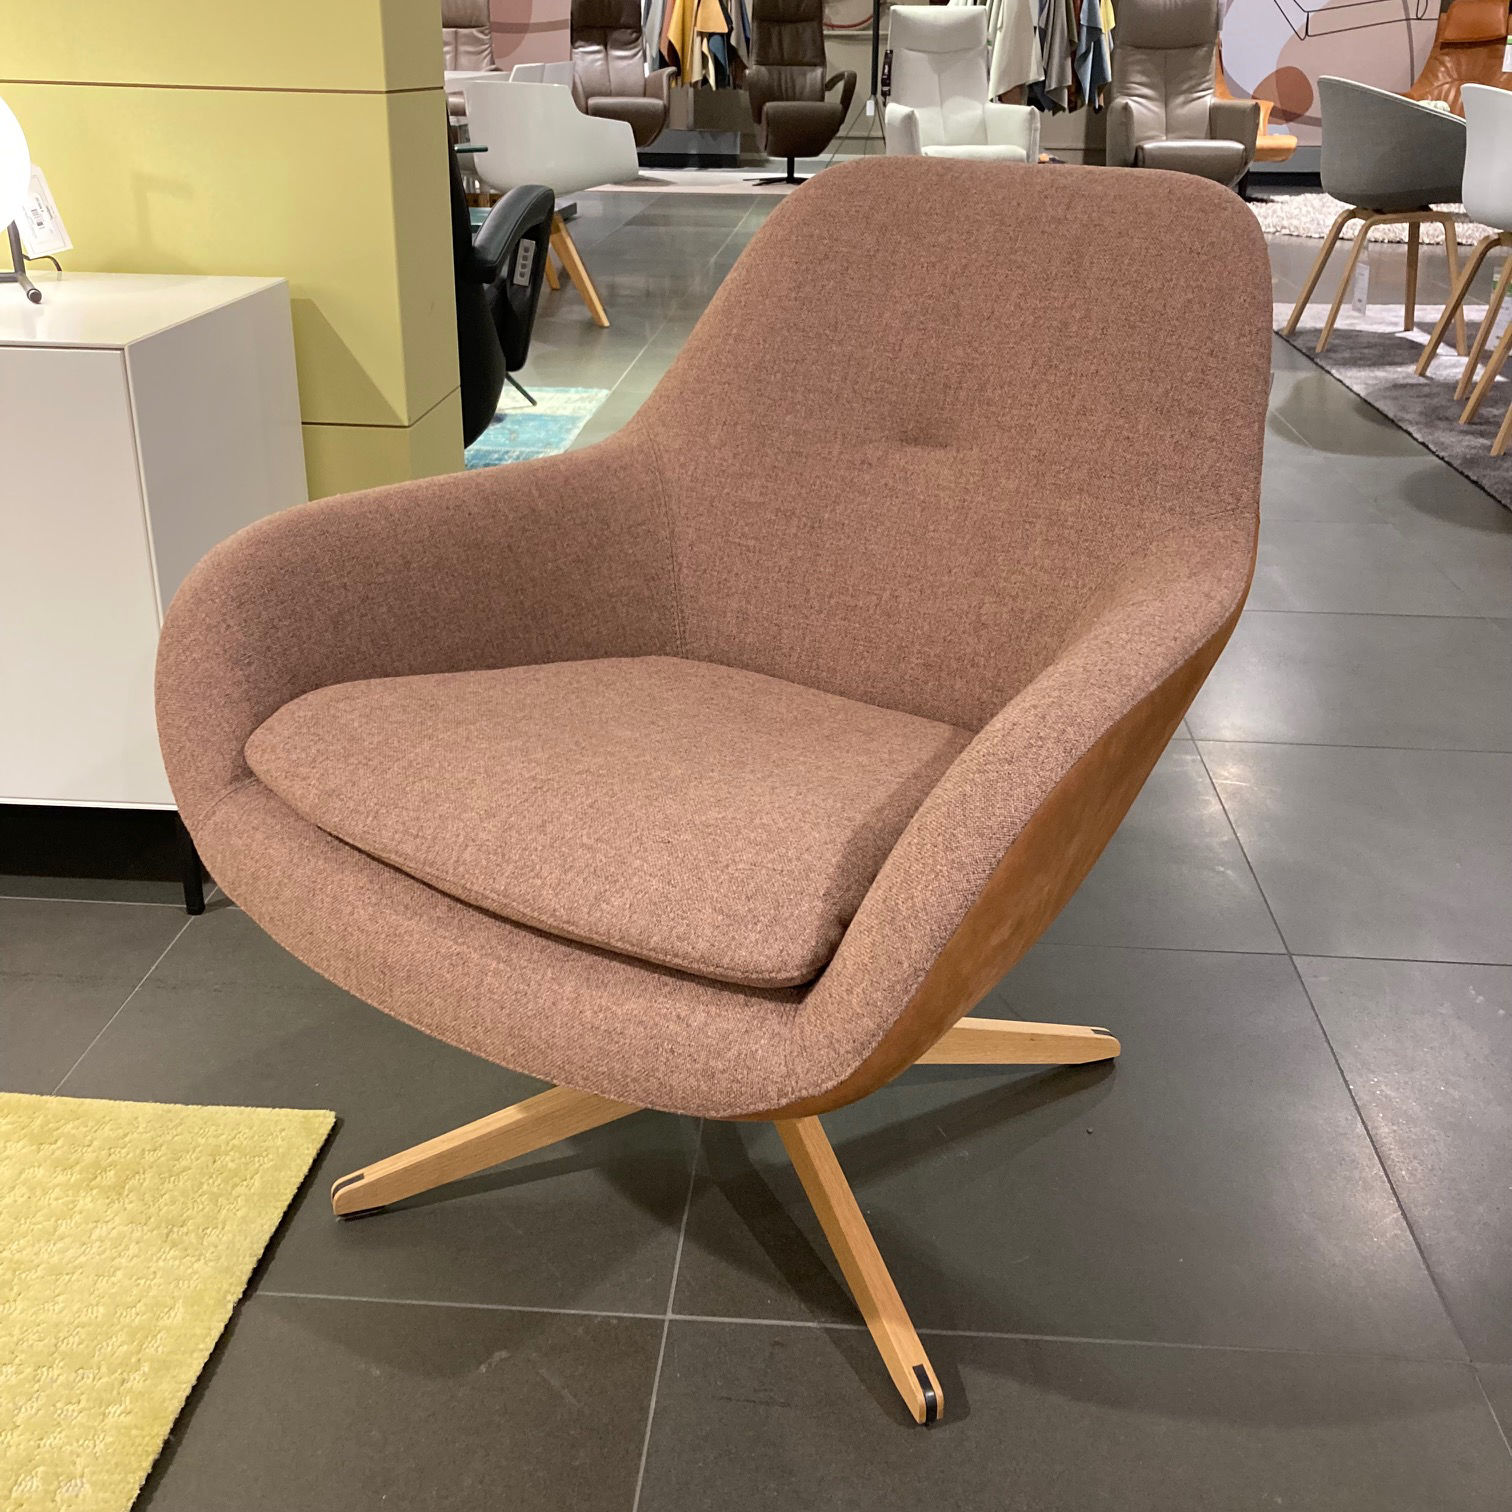 Pode Sparkle One fauteuil - Showroom